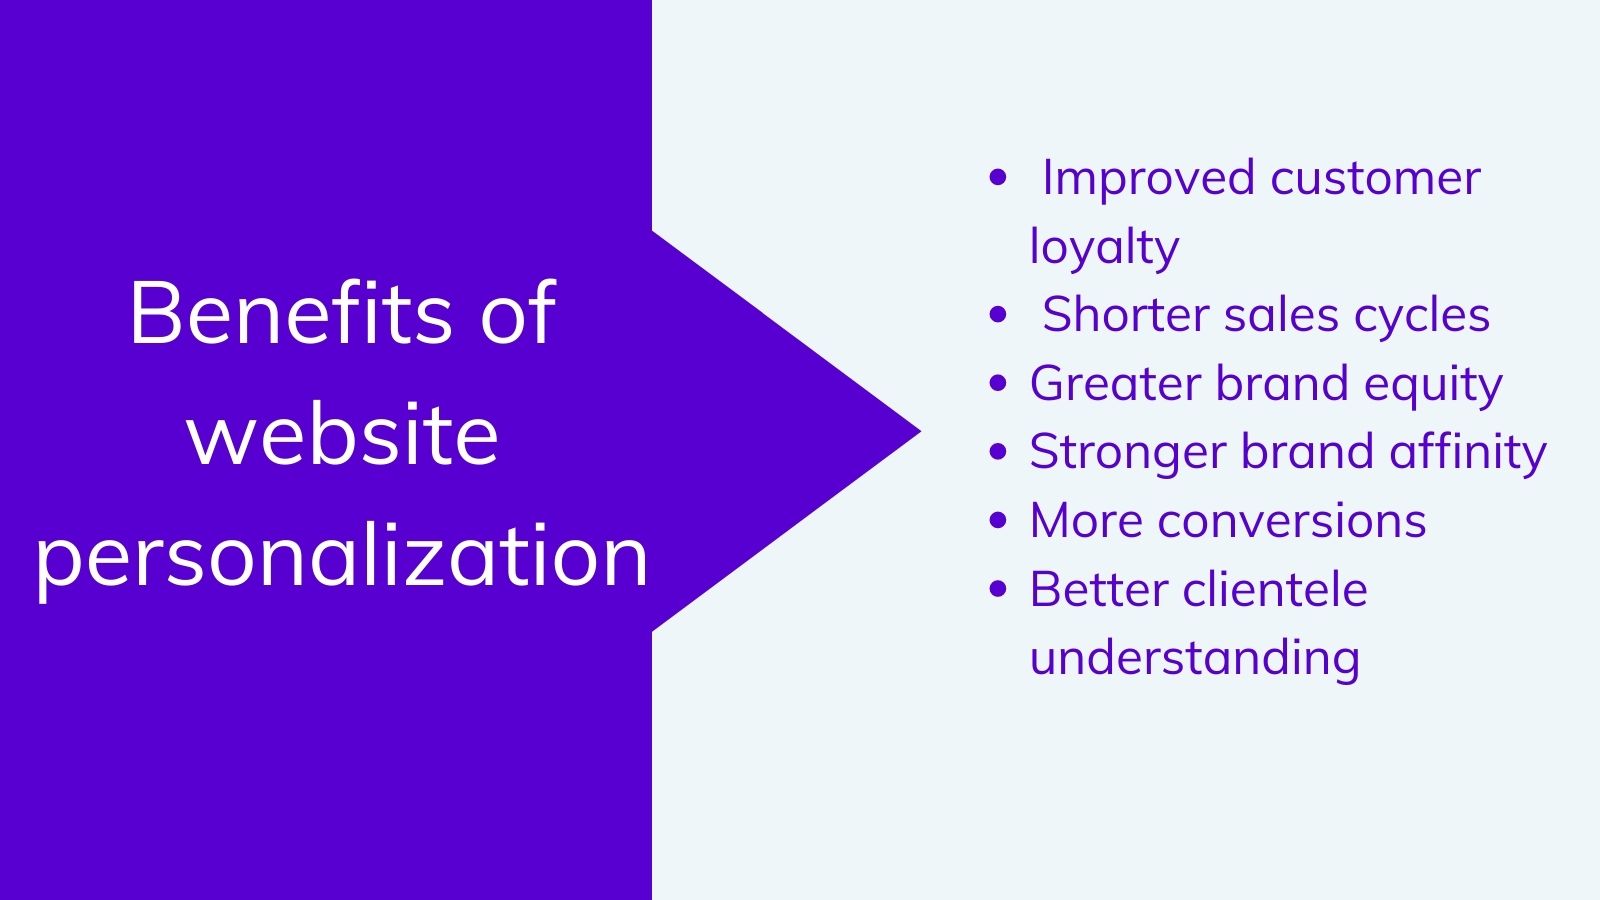 Benefits of website personalization on agilitycms.com